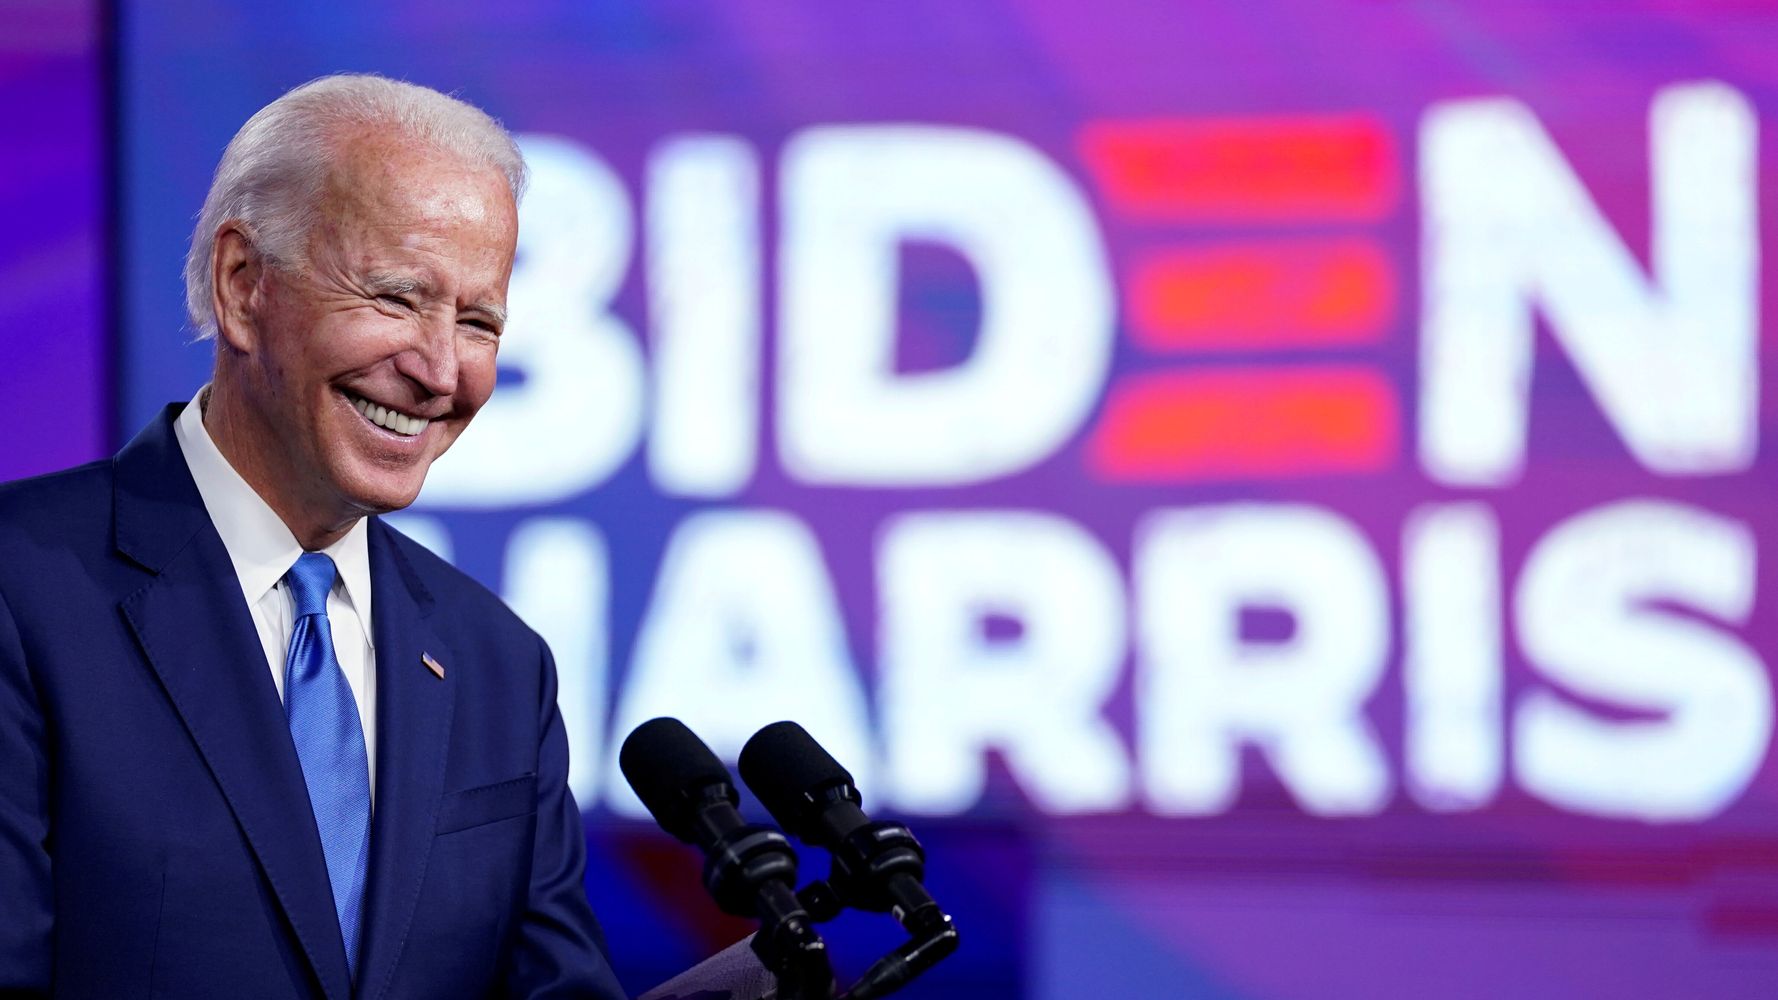 California Certifies Its Electoral Votes, Officially Securing Biden’s Victory